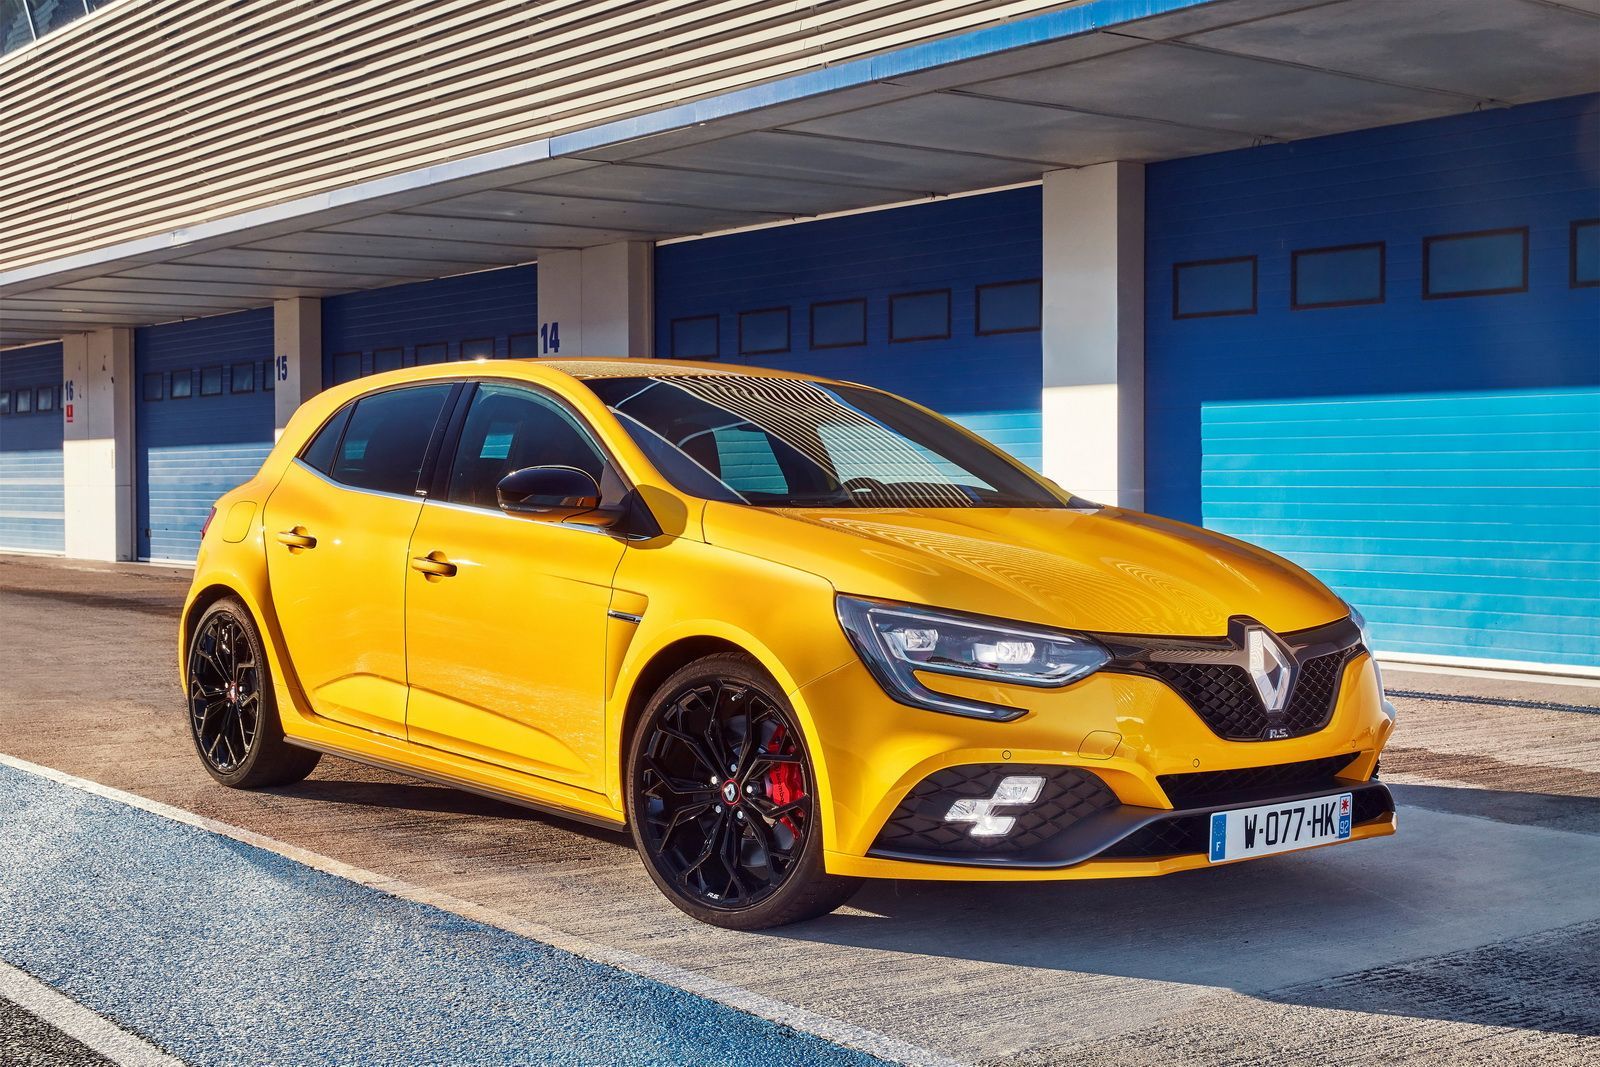 New Renault Megane RS Detailed In 132 Image. Carscoops. Renault megane, New renault, Renault